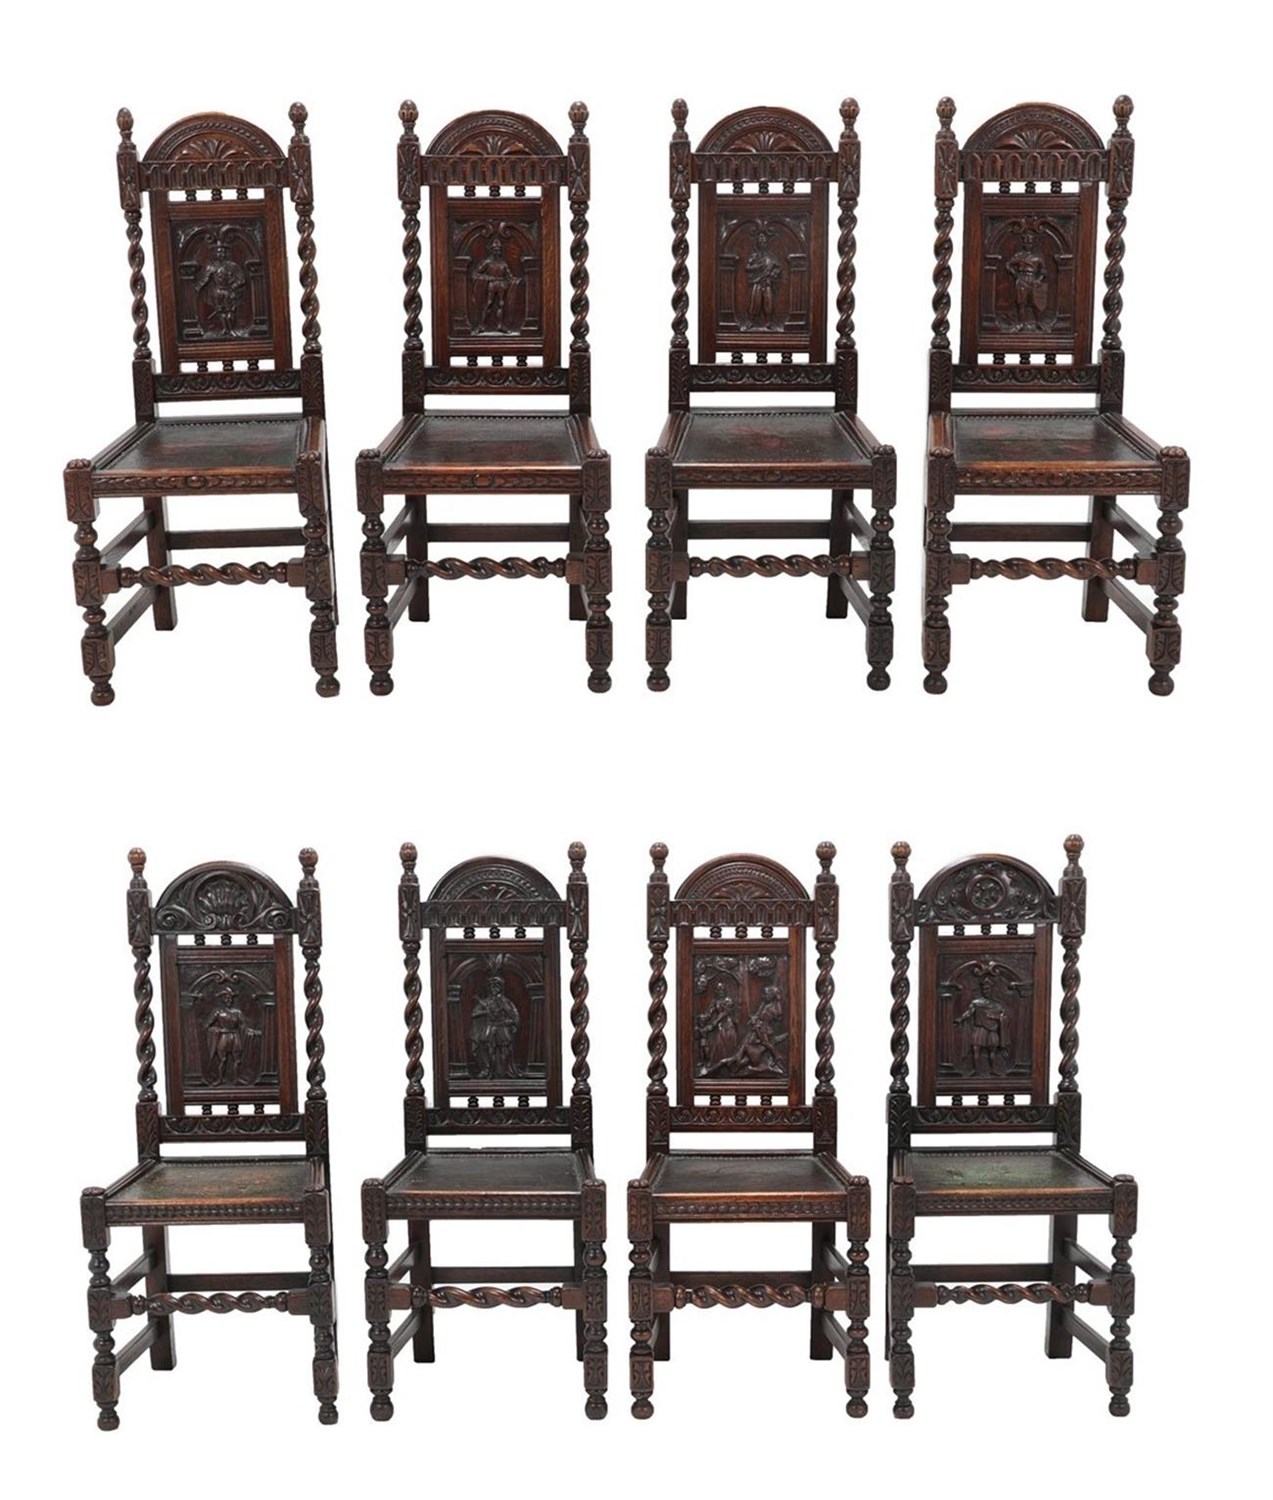 Lot 468 - Eight Carved Oak Dining Chairs, late 19th/early 20th century, with close-nailed and painted leather